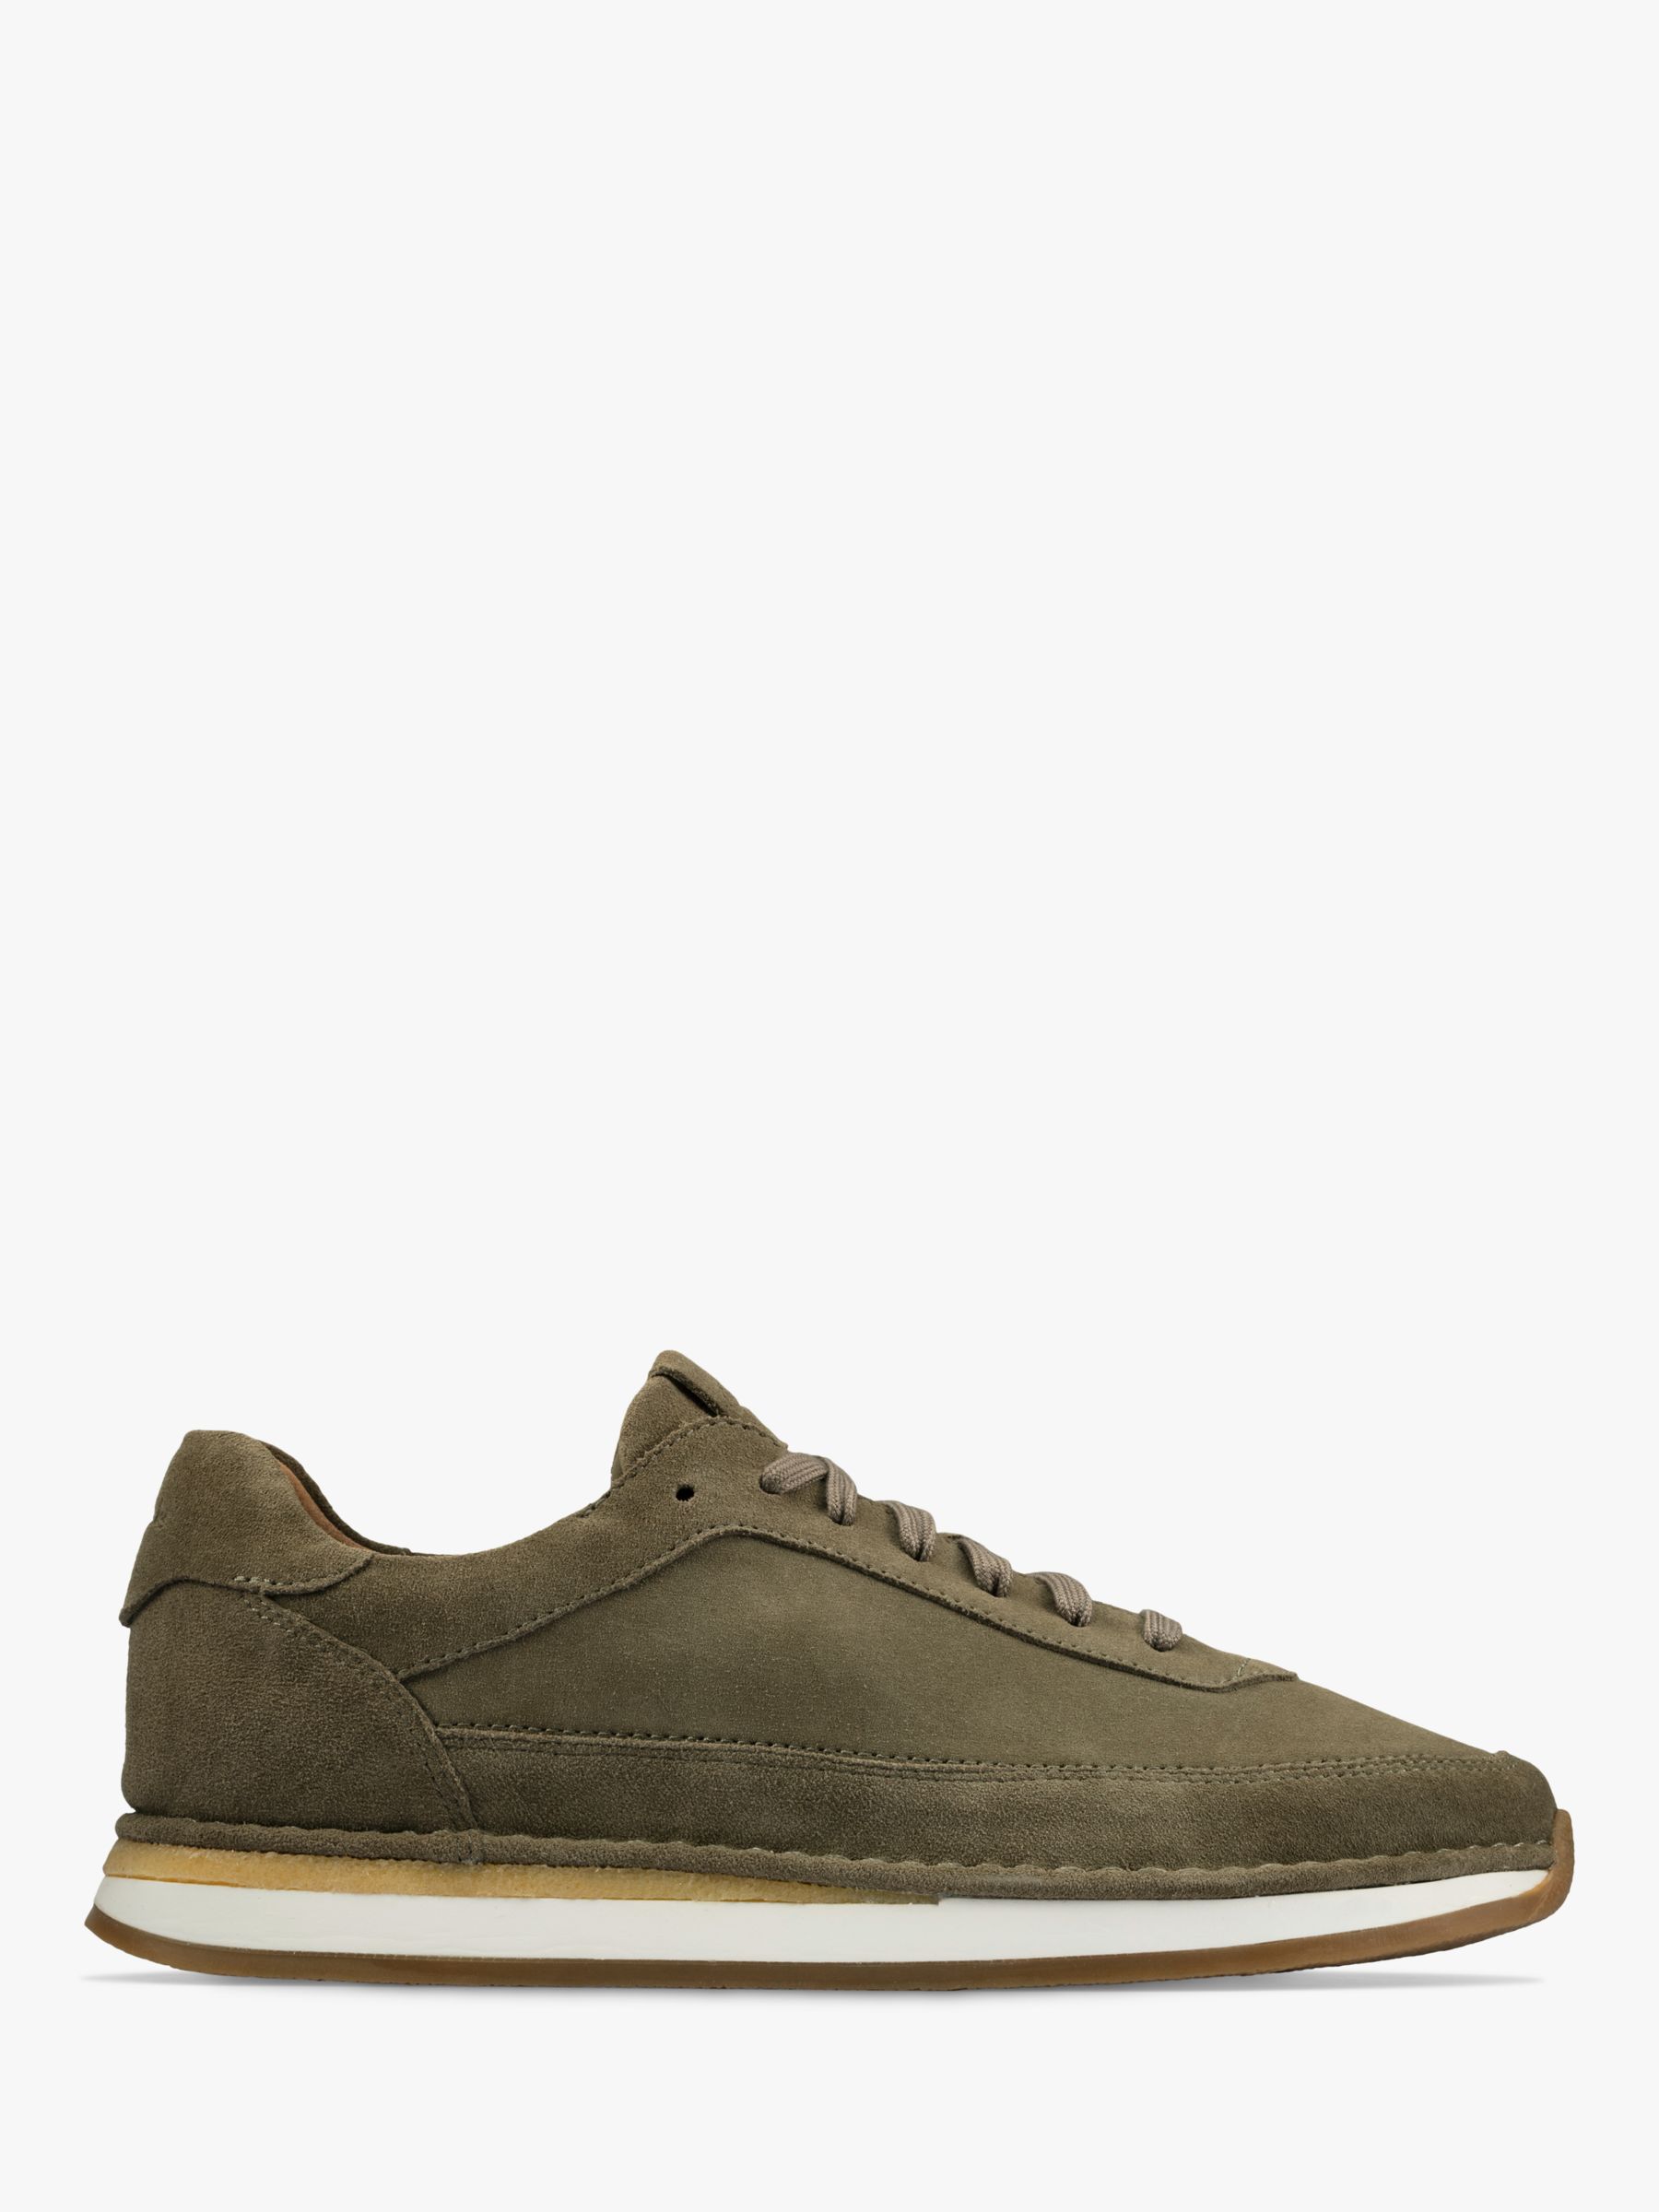 Clarks CraftRun Lace Trainers, Olive at John Lewis & Partners